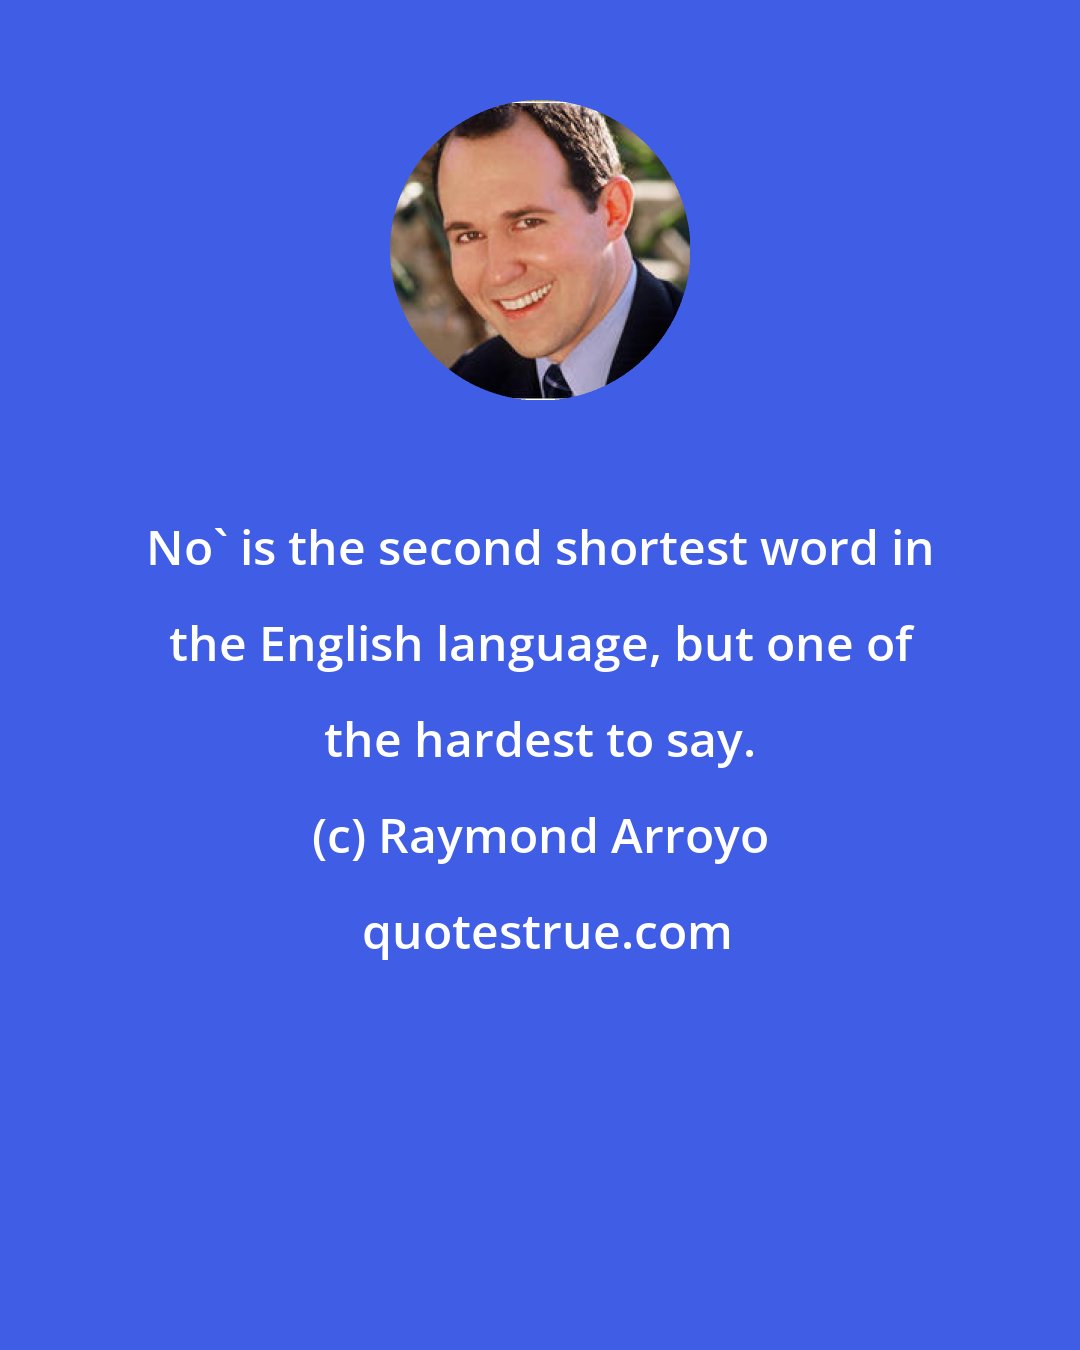 Raymond Arroyo: No' is the second shortest word in the English language, but one of the hardest to say.